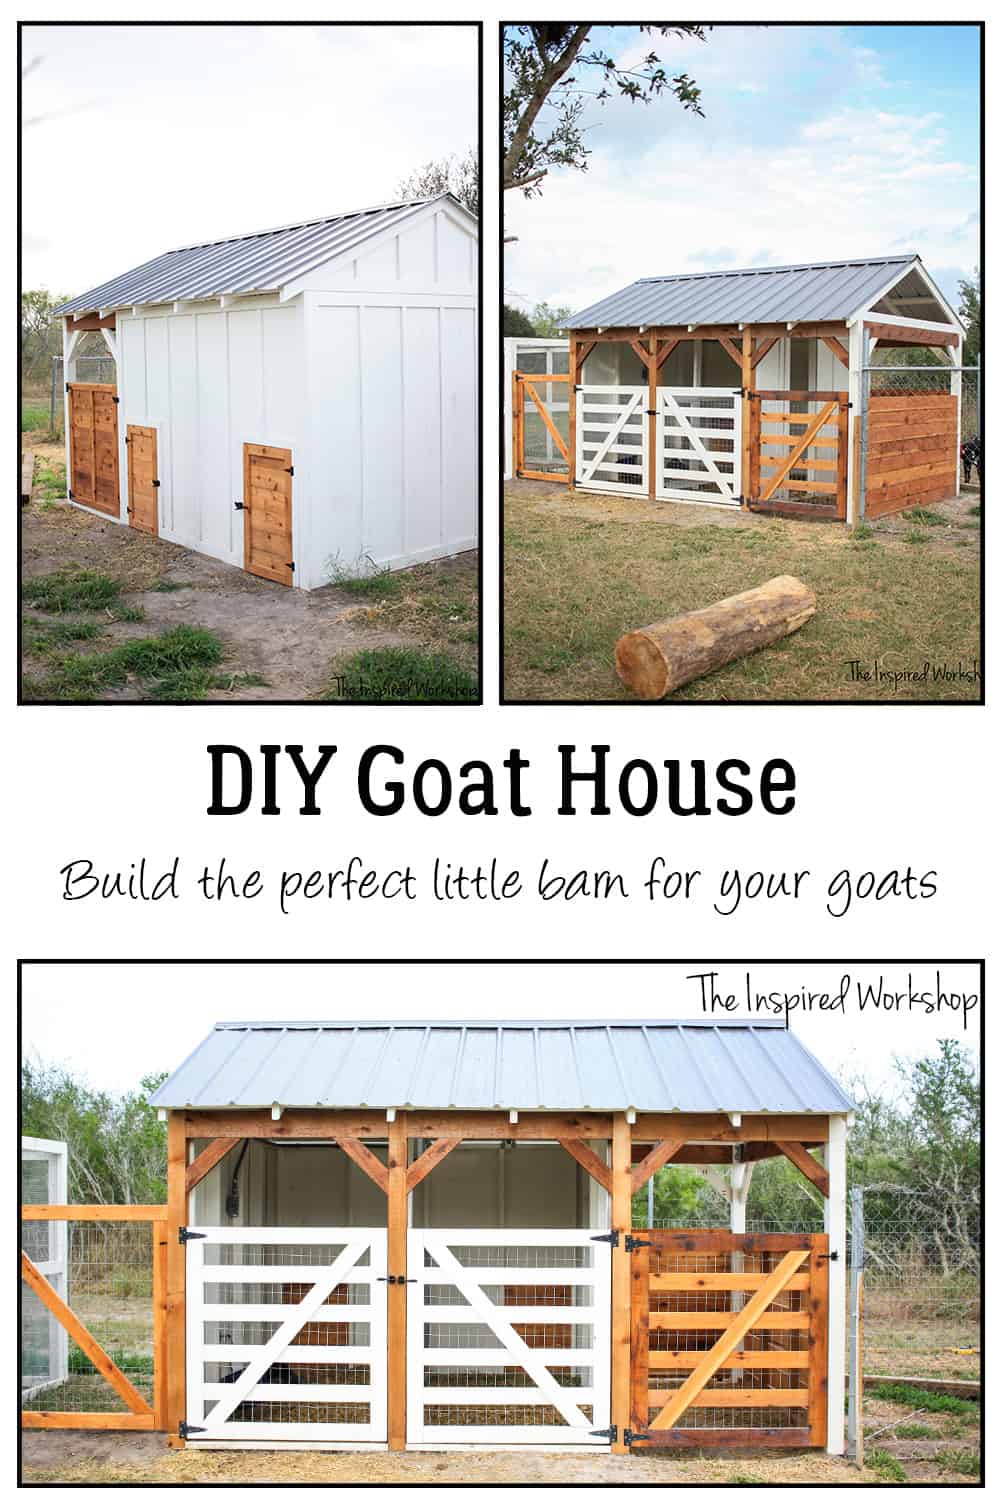 DIY Goat House collage of photos of the goat barn showing it from all angles and includes the writting in the middle that says DIY Goat House - Build the perfect litle barn for your goats